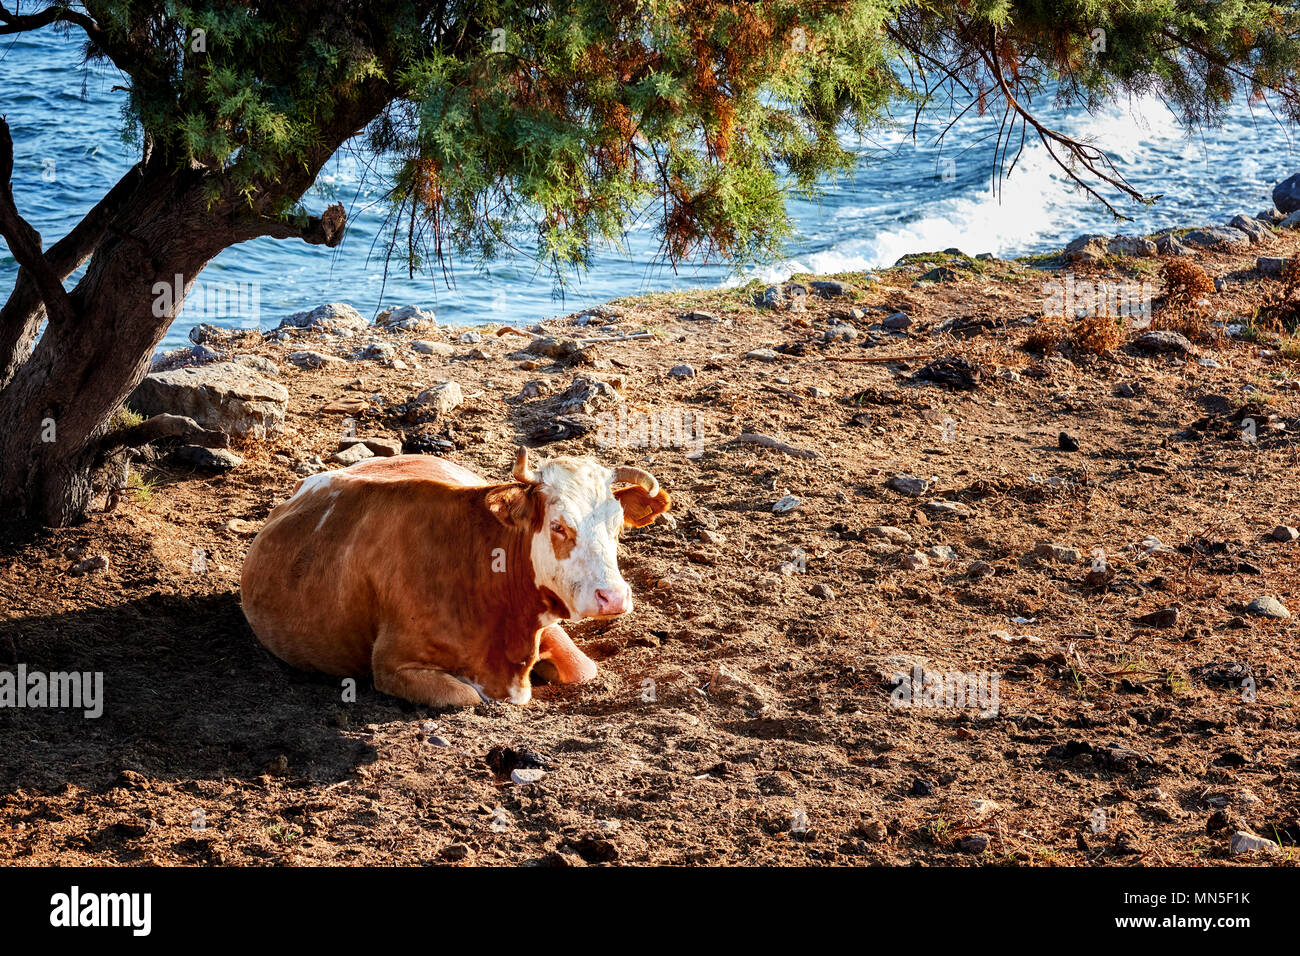 A beautiful and healthy white-brown cow sitting and resting under a tree on a dirt-surface near the seaside in a rural area. Stock Photo